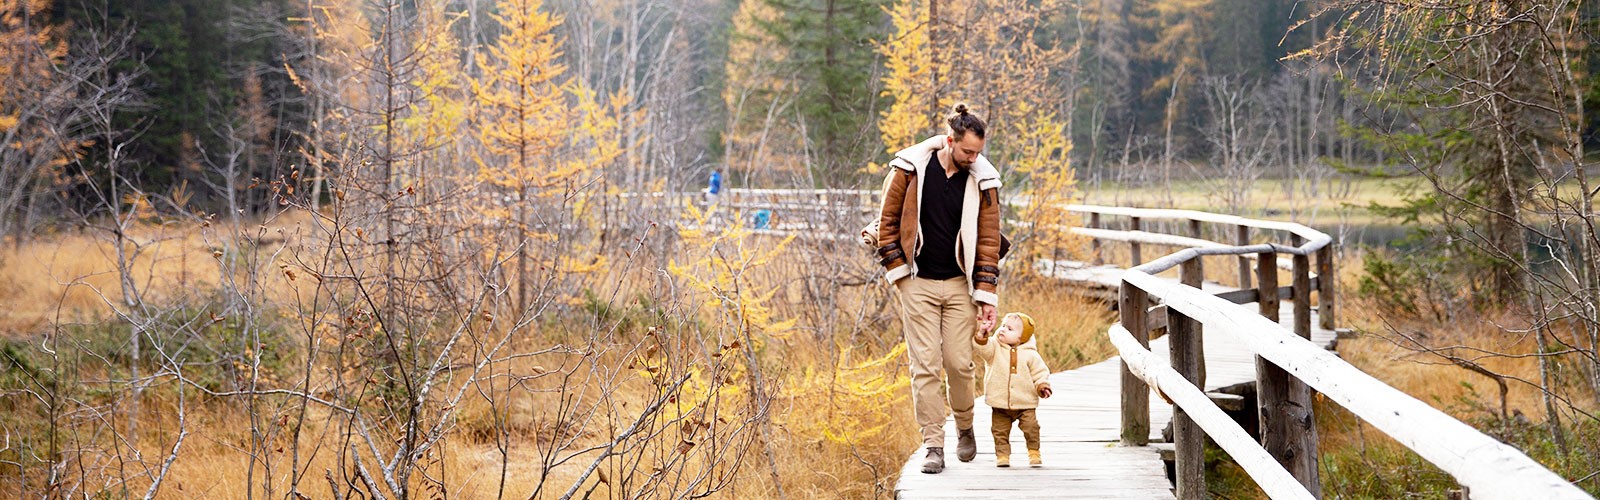 Man Walking On Wooden Bridge with child in Fall